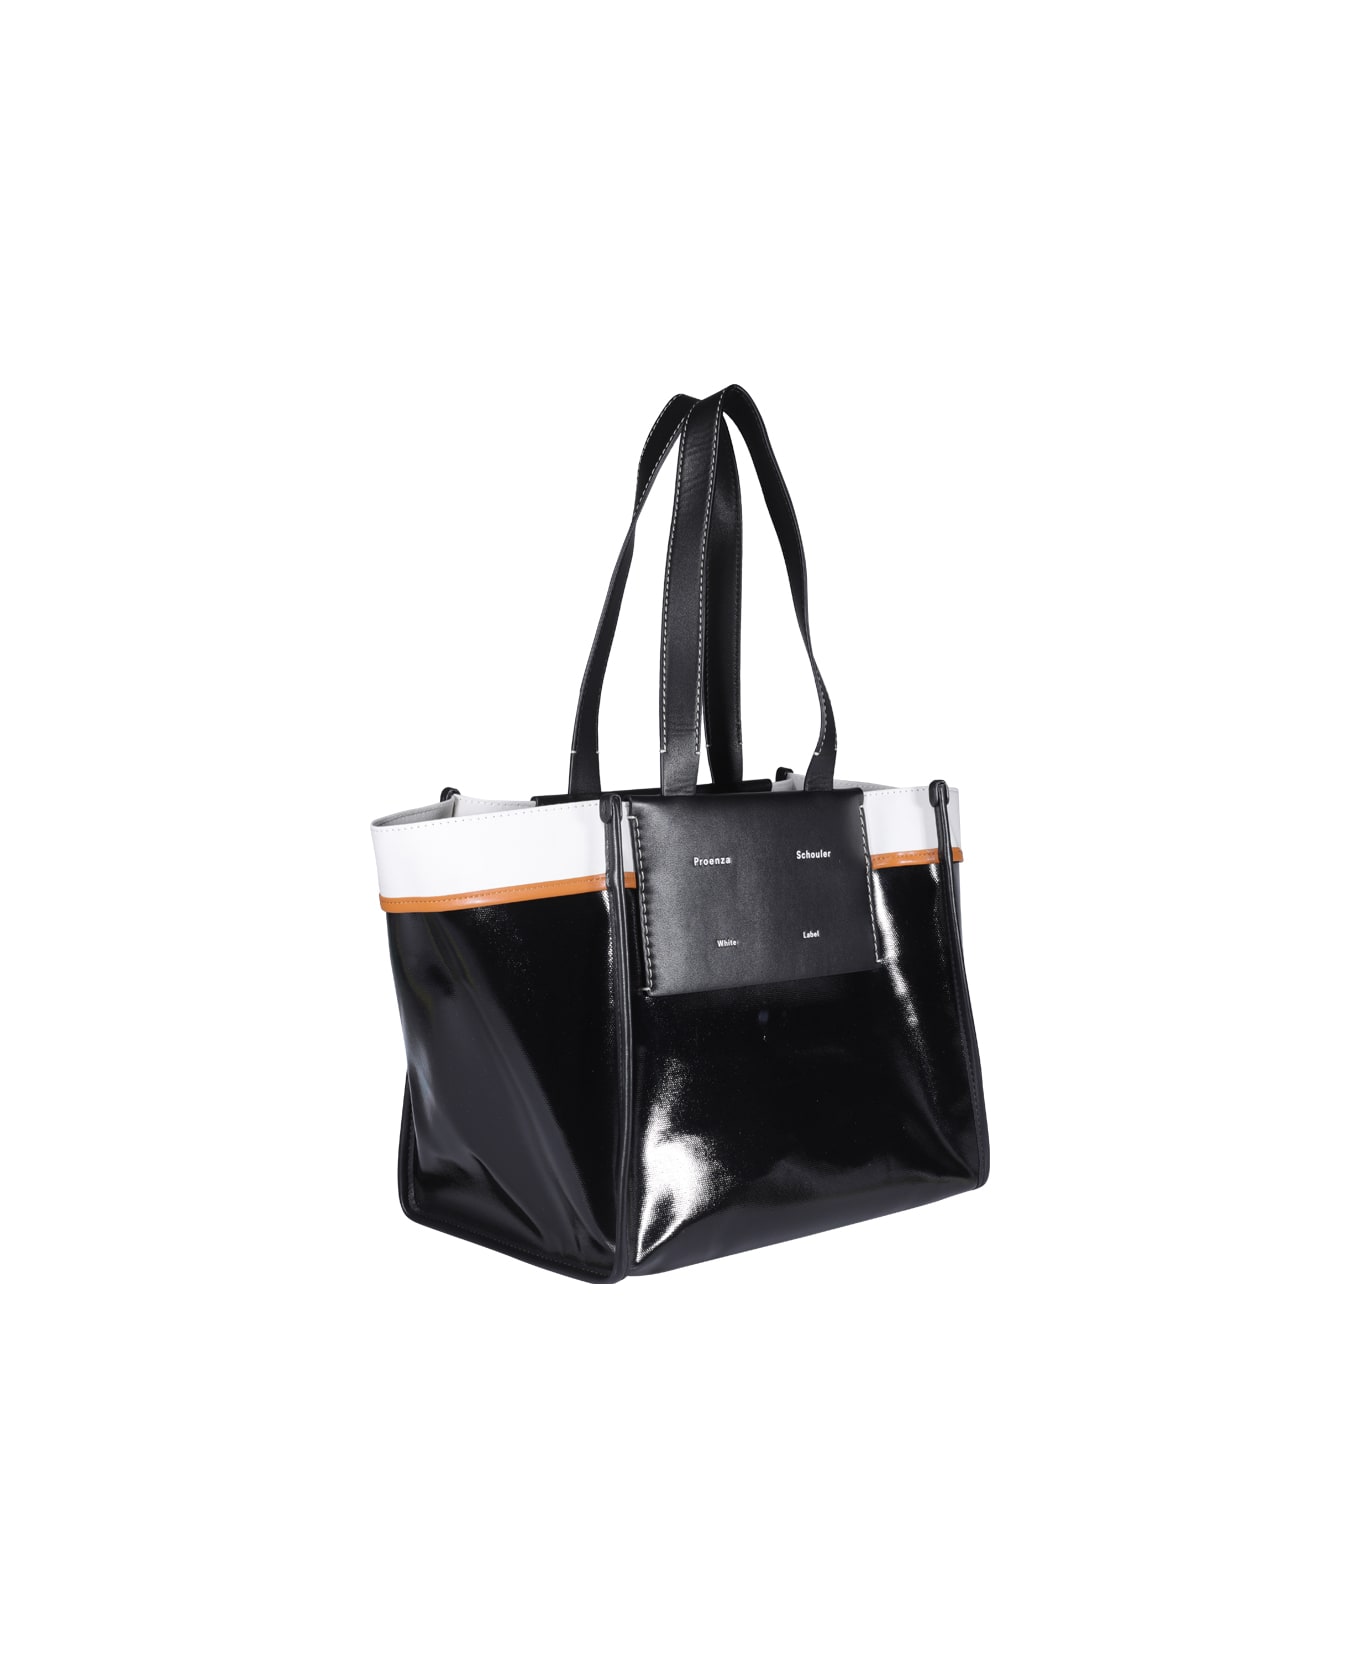 Proenza Schouler Large Morris Coated Canvas Tote - BLACK/WHITE